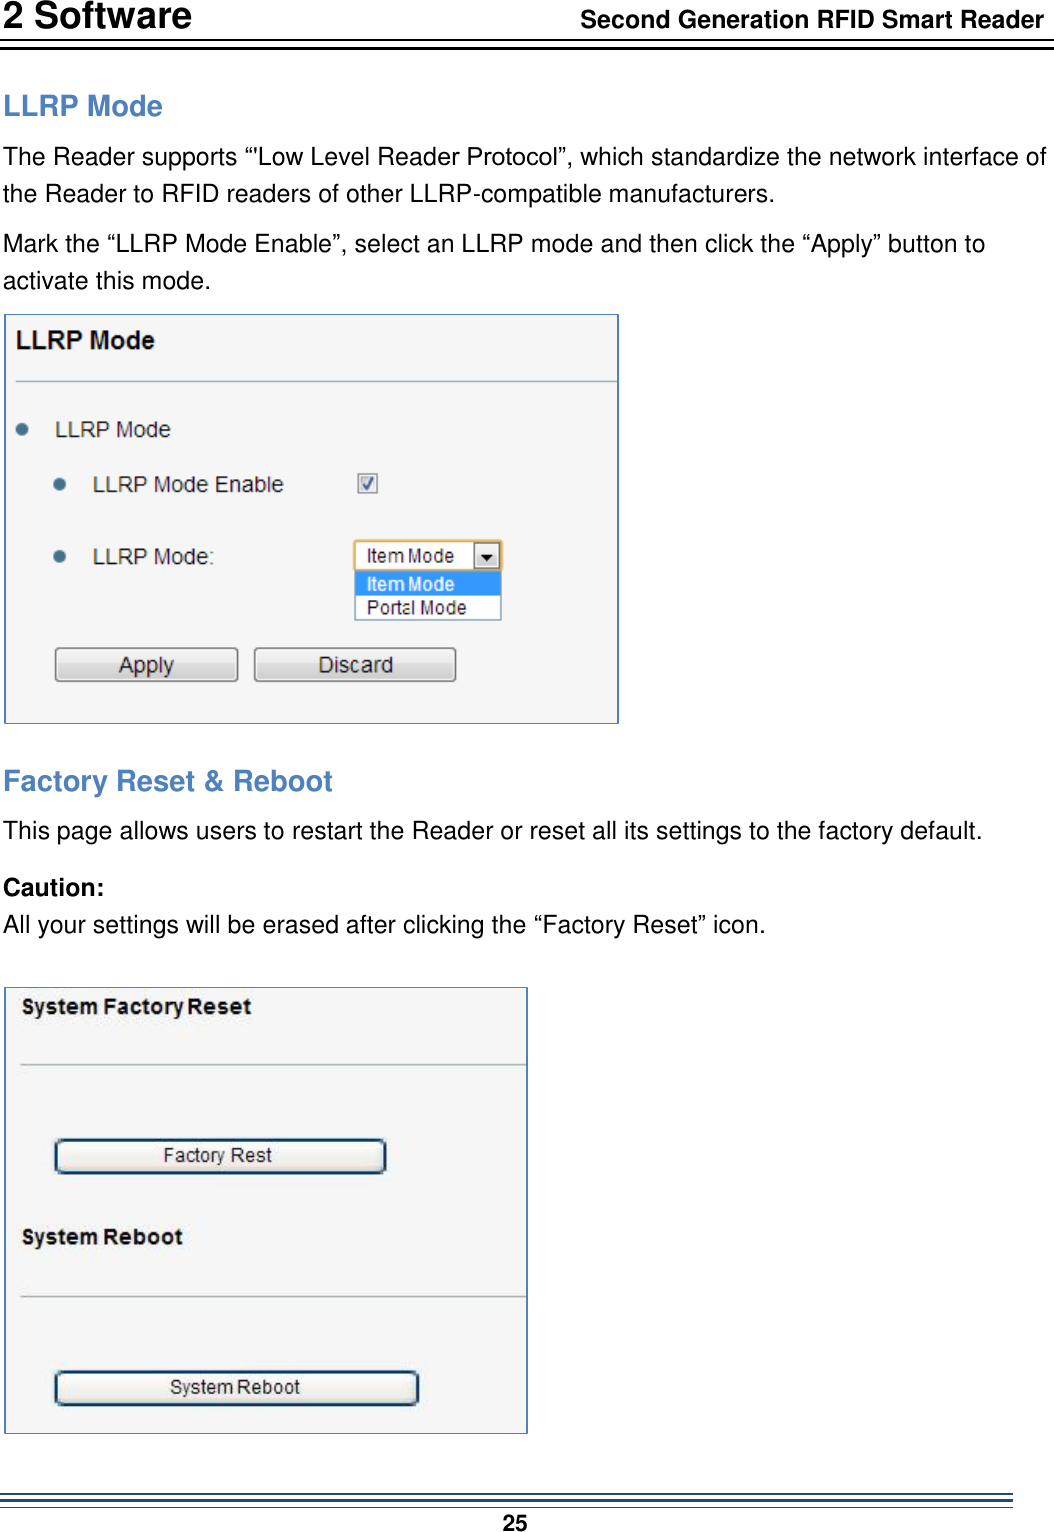 2 Software                                Second Generation RFID Smart Reader                           25  LLRP Mode The Reader supports “&apos;Low Level Reader Protocol”, which standardize the network interface of the Reader to RFID readers of other LLRP-compatible manufacturers. Mark the “LLRP Mode Enable”, select an LLRP mode and then click the “Apply” button to activate this mode.    Factory Reset &amp; Reboot This page allows users to restart the Reader or reset all its settings to the factory default. Caution:   All your settings will be erased after clicking the “Factory Reset” icon.  